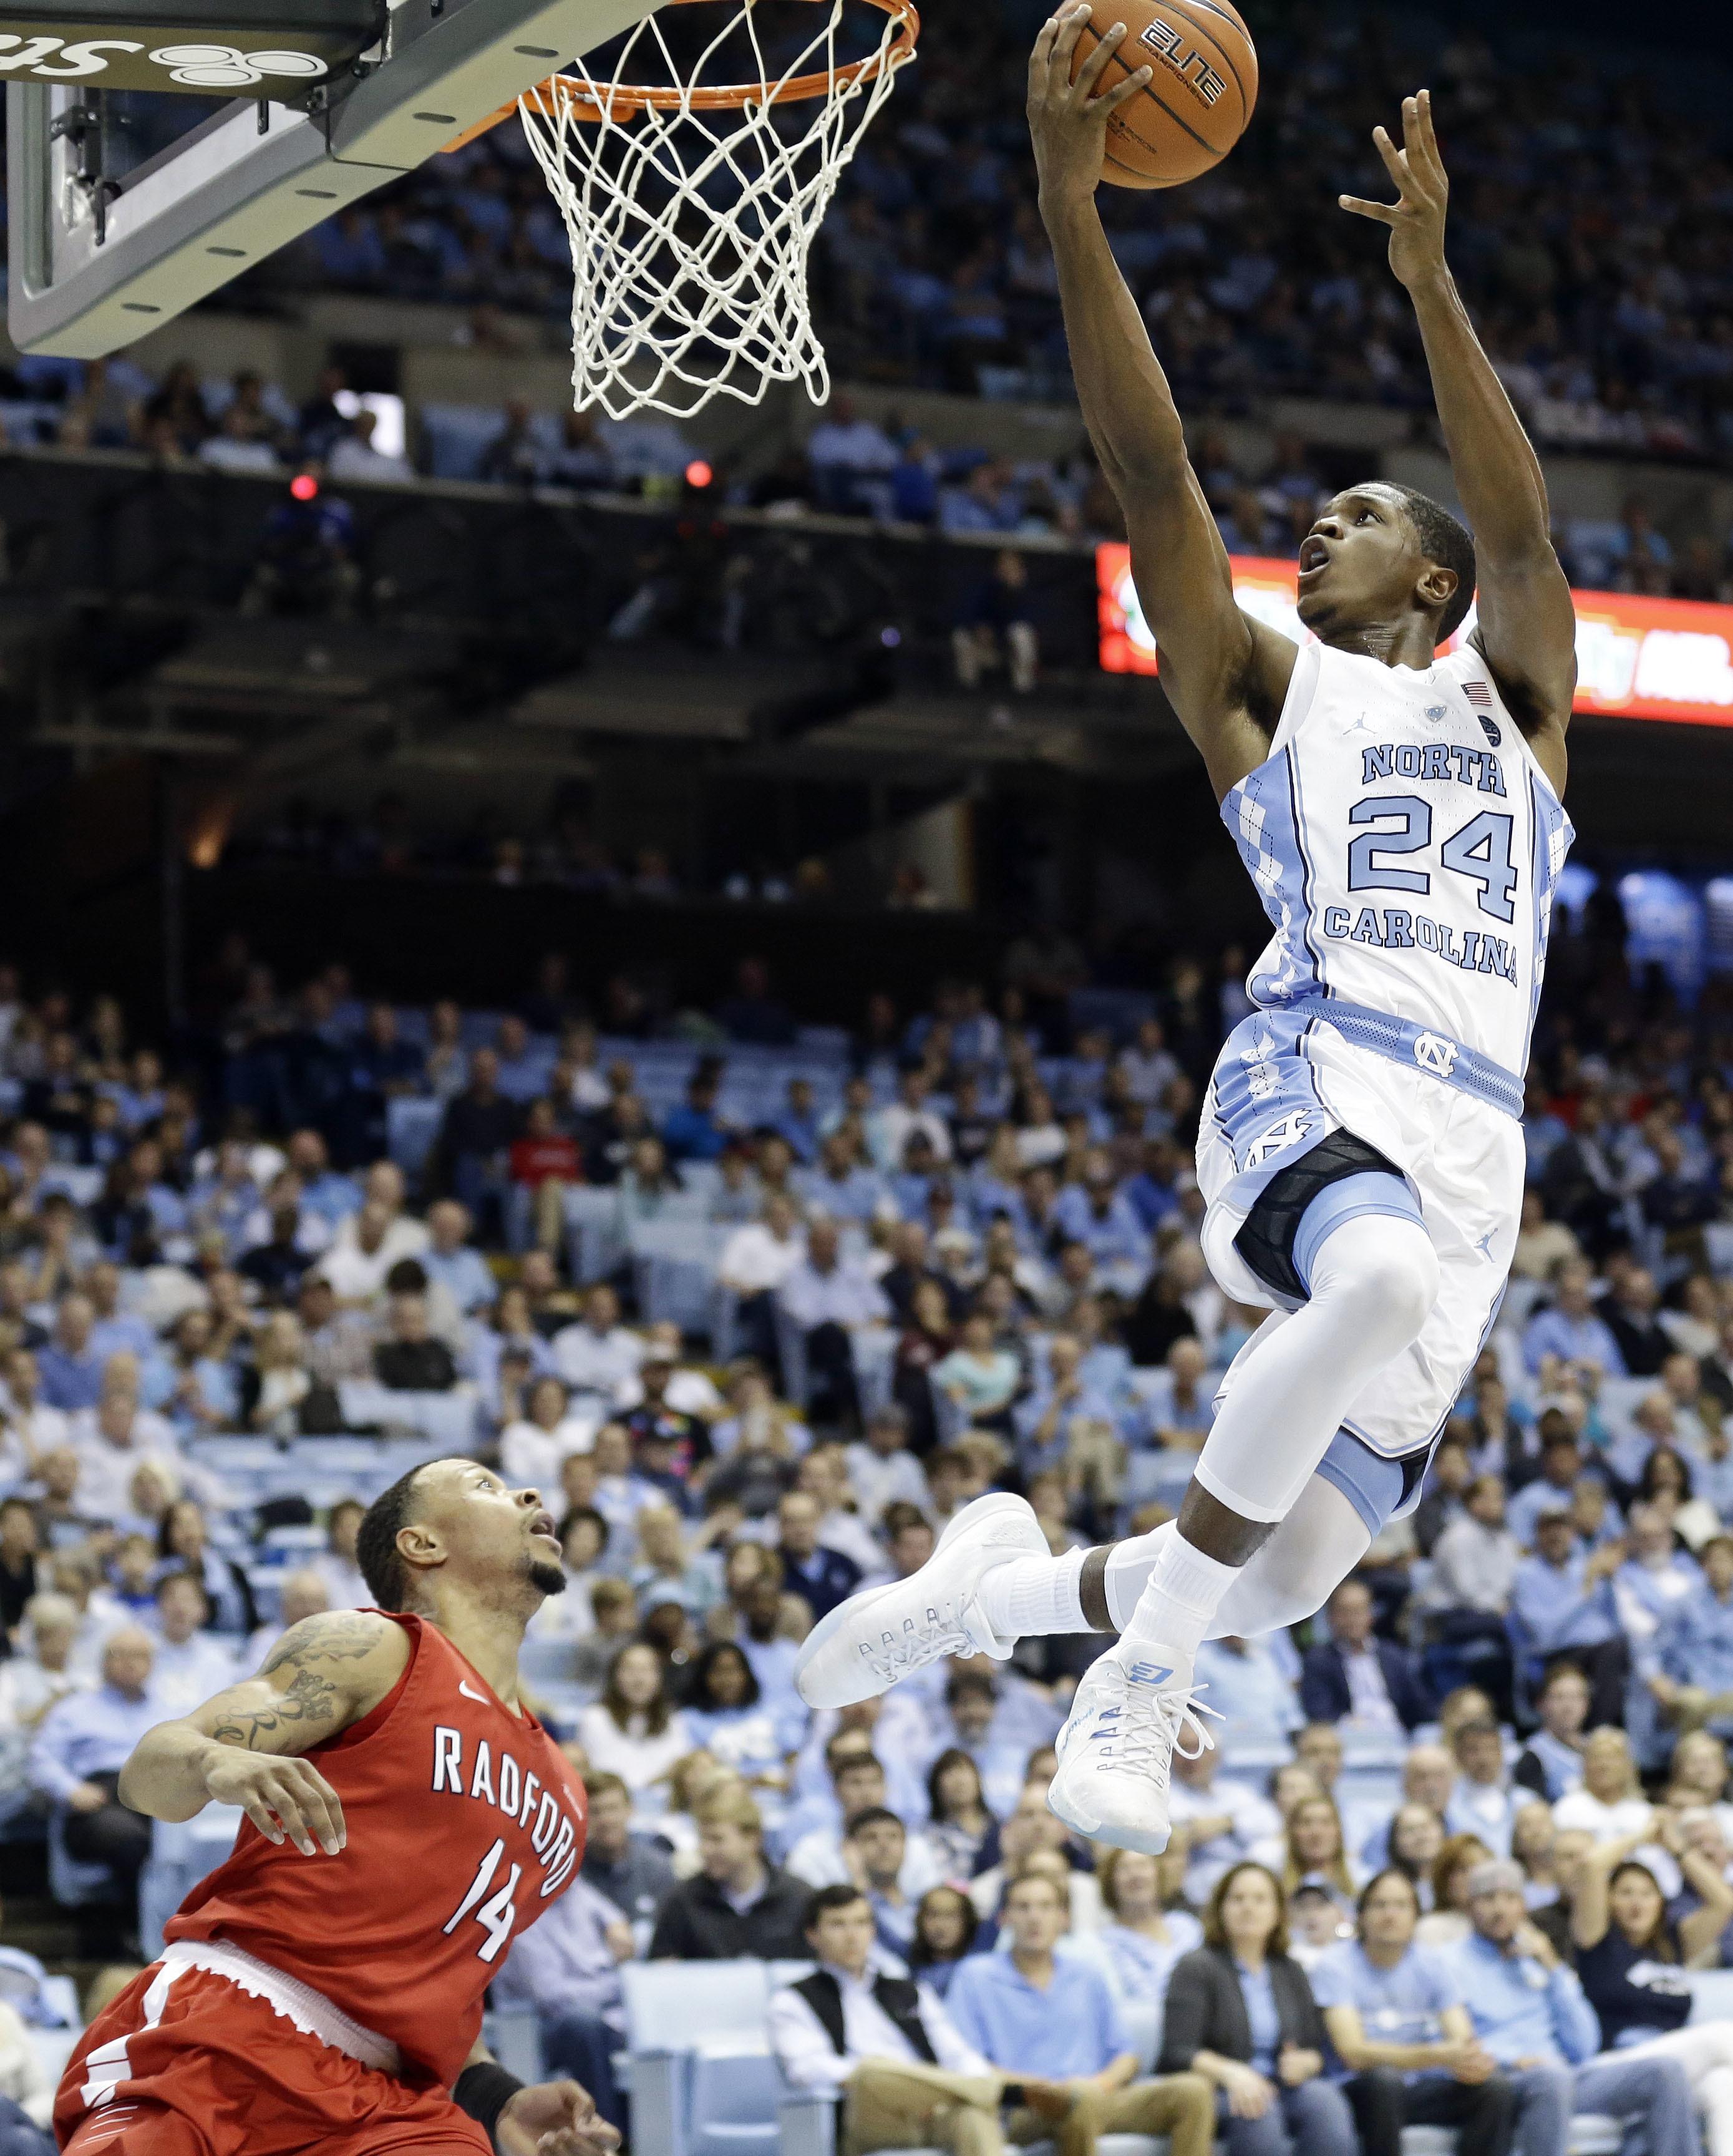 UNC Guard Kenny Williams (24) during the NCAA Basketball game